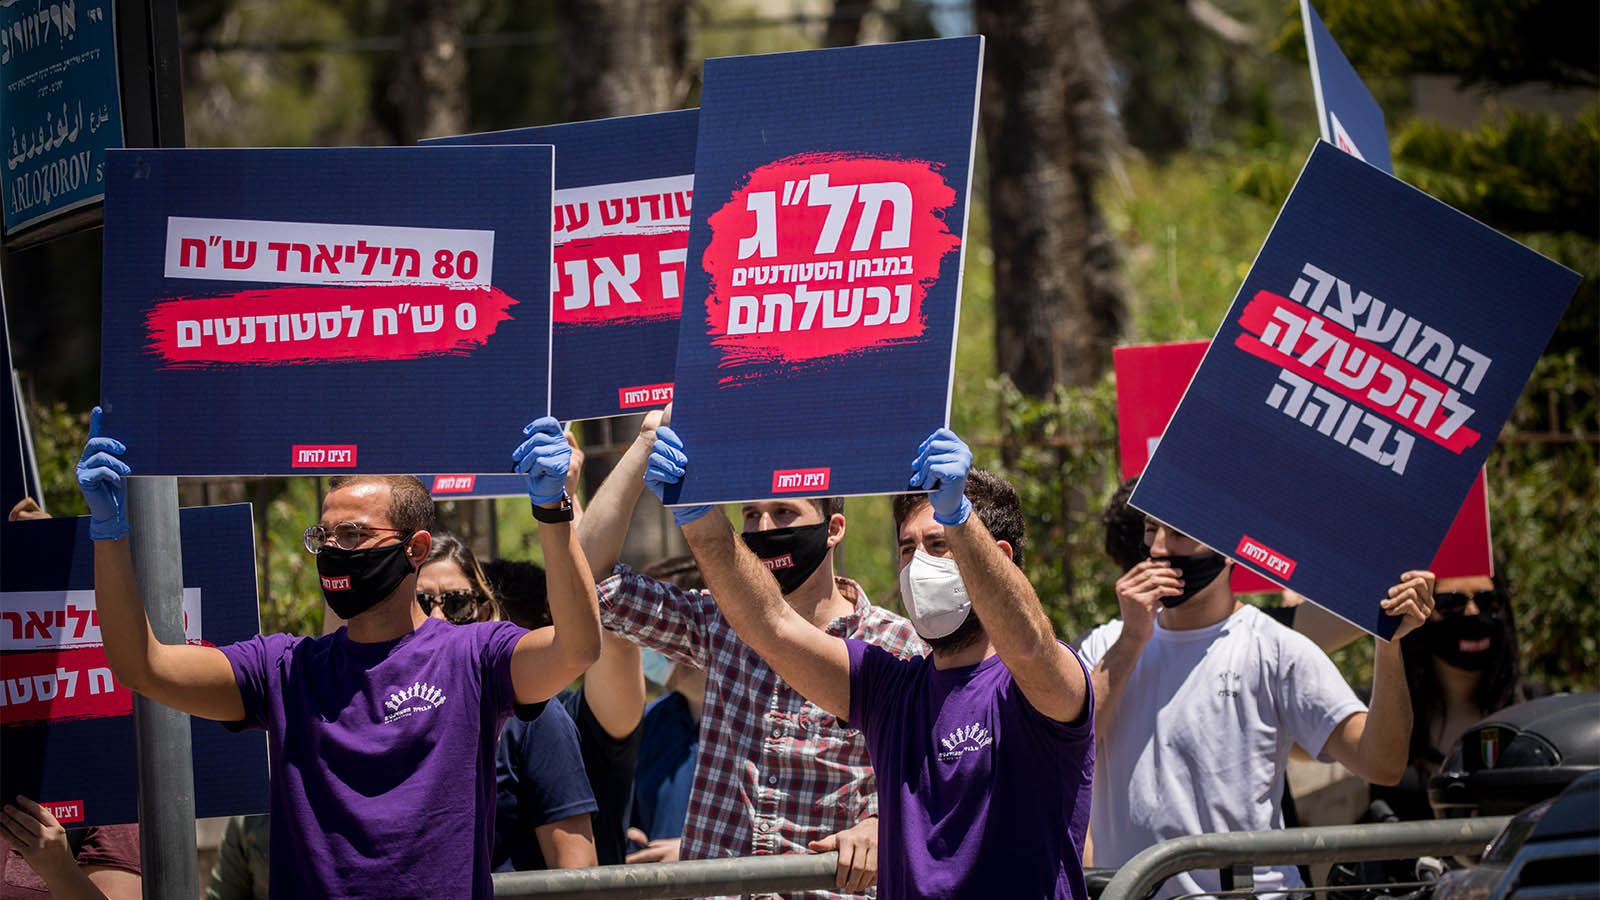 Students demanding financial support in face of COVID-19 (Photograph: Yonatan Zindel/Flash 90)